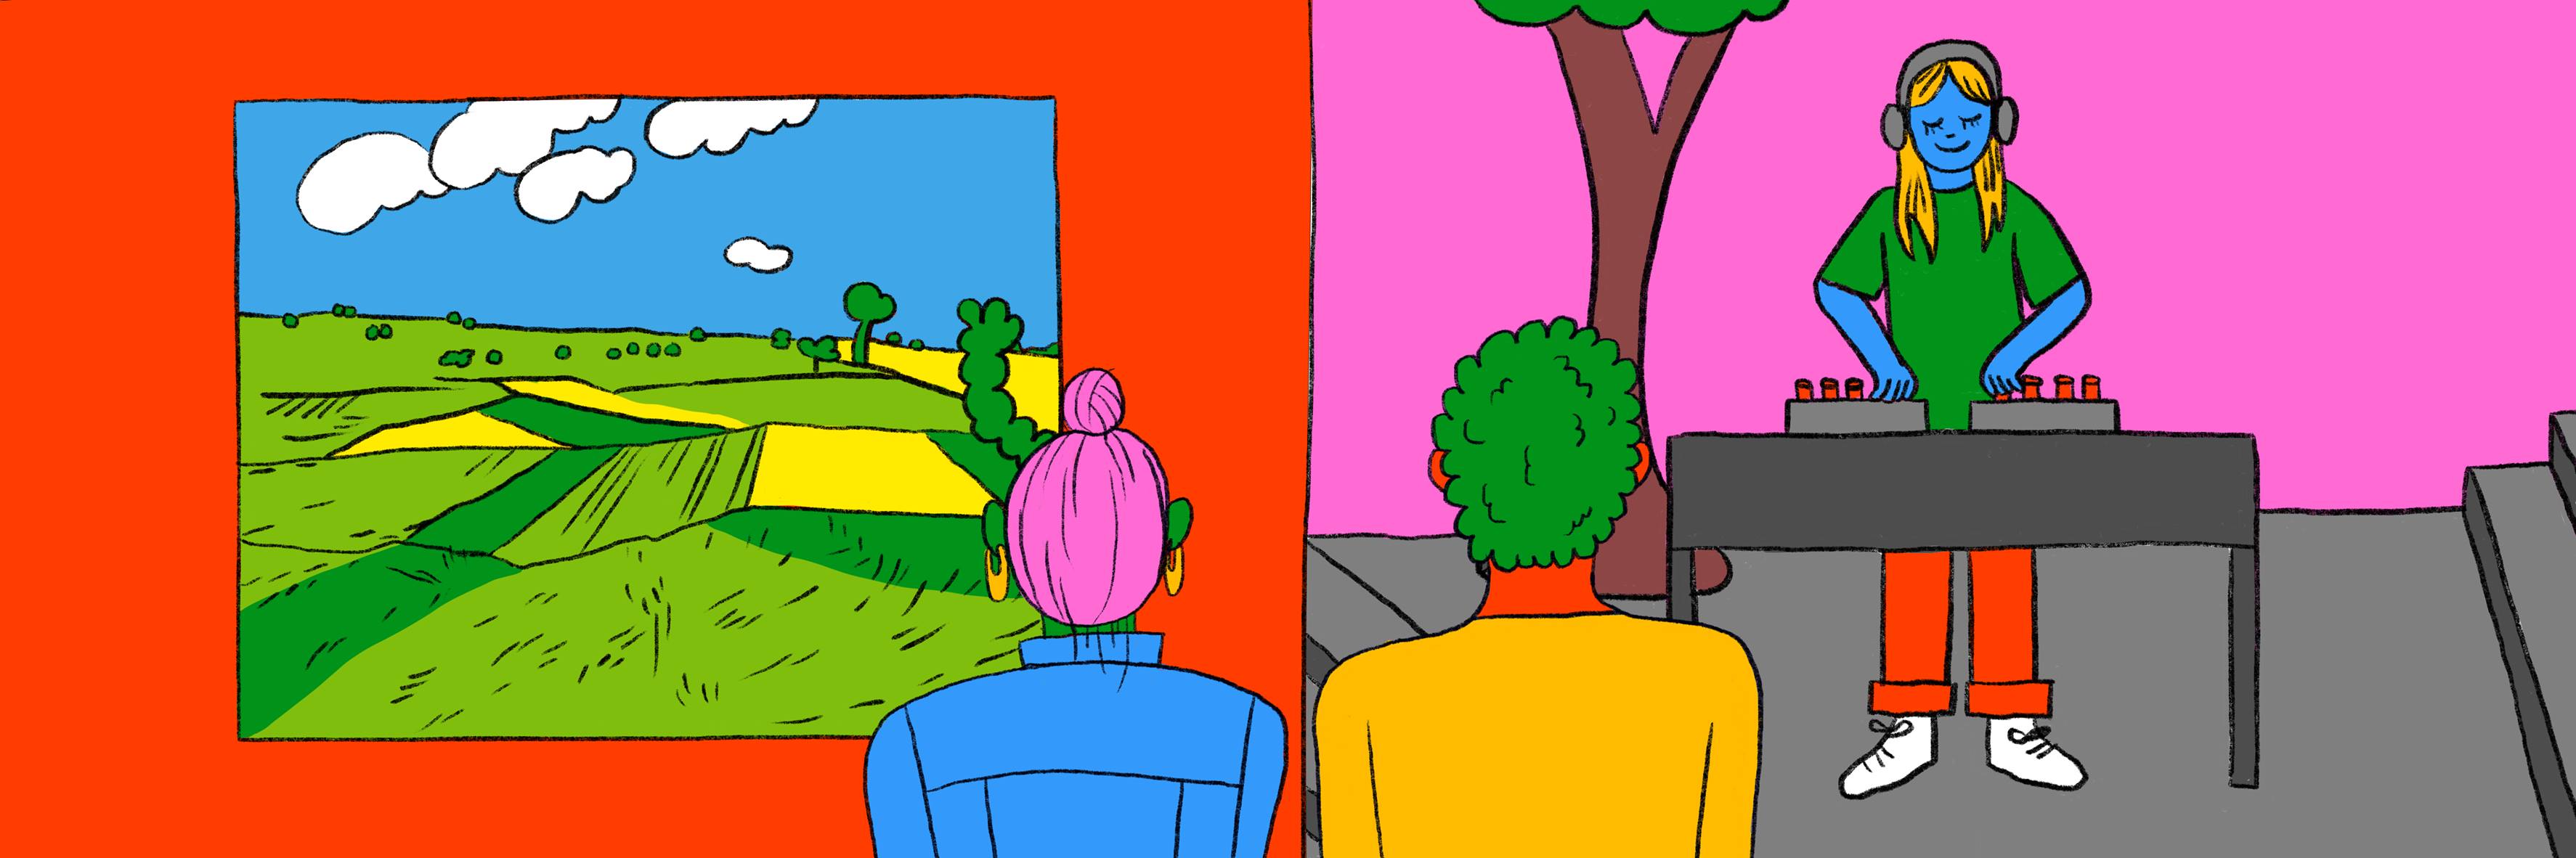 Bold, colorful graphic drawing of two people enjoying art and music in an outdoor setting.